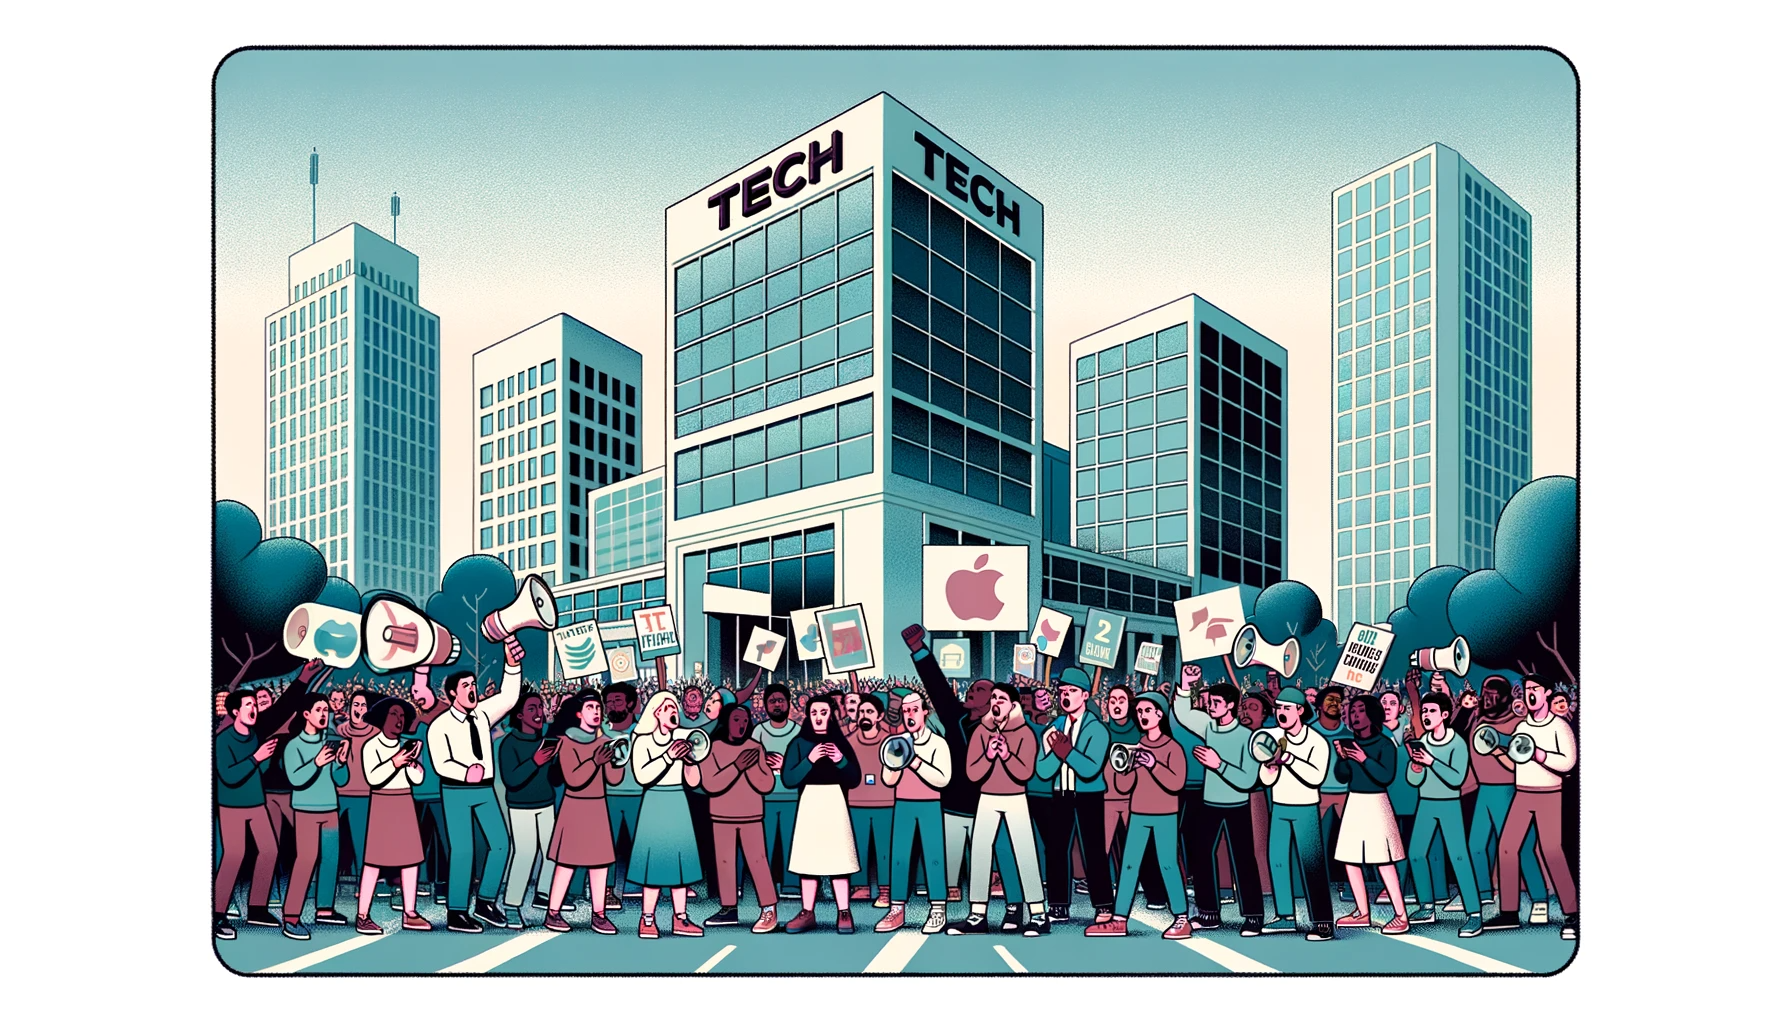 Rectangular illustration of a Silicon Valley protest scene. In the foreground, various gendered and racially diverse tech workers, students, and activists